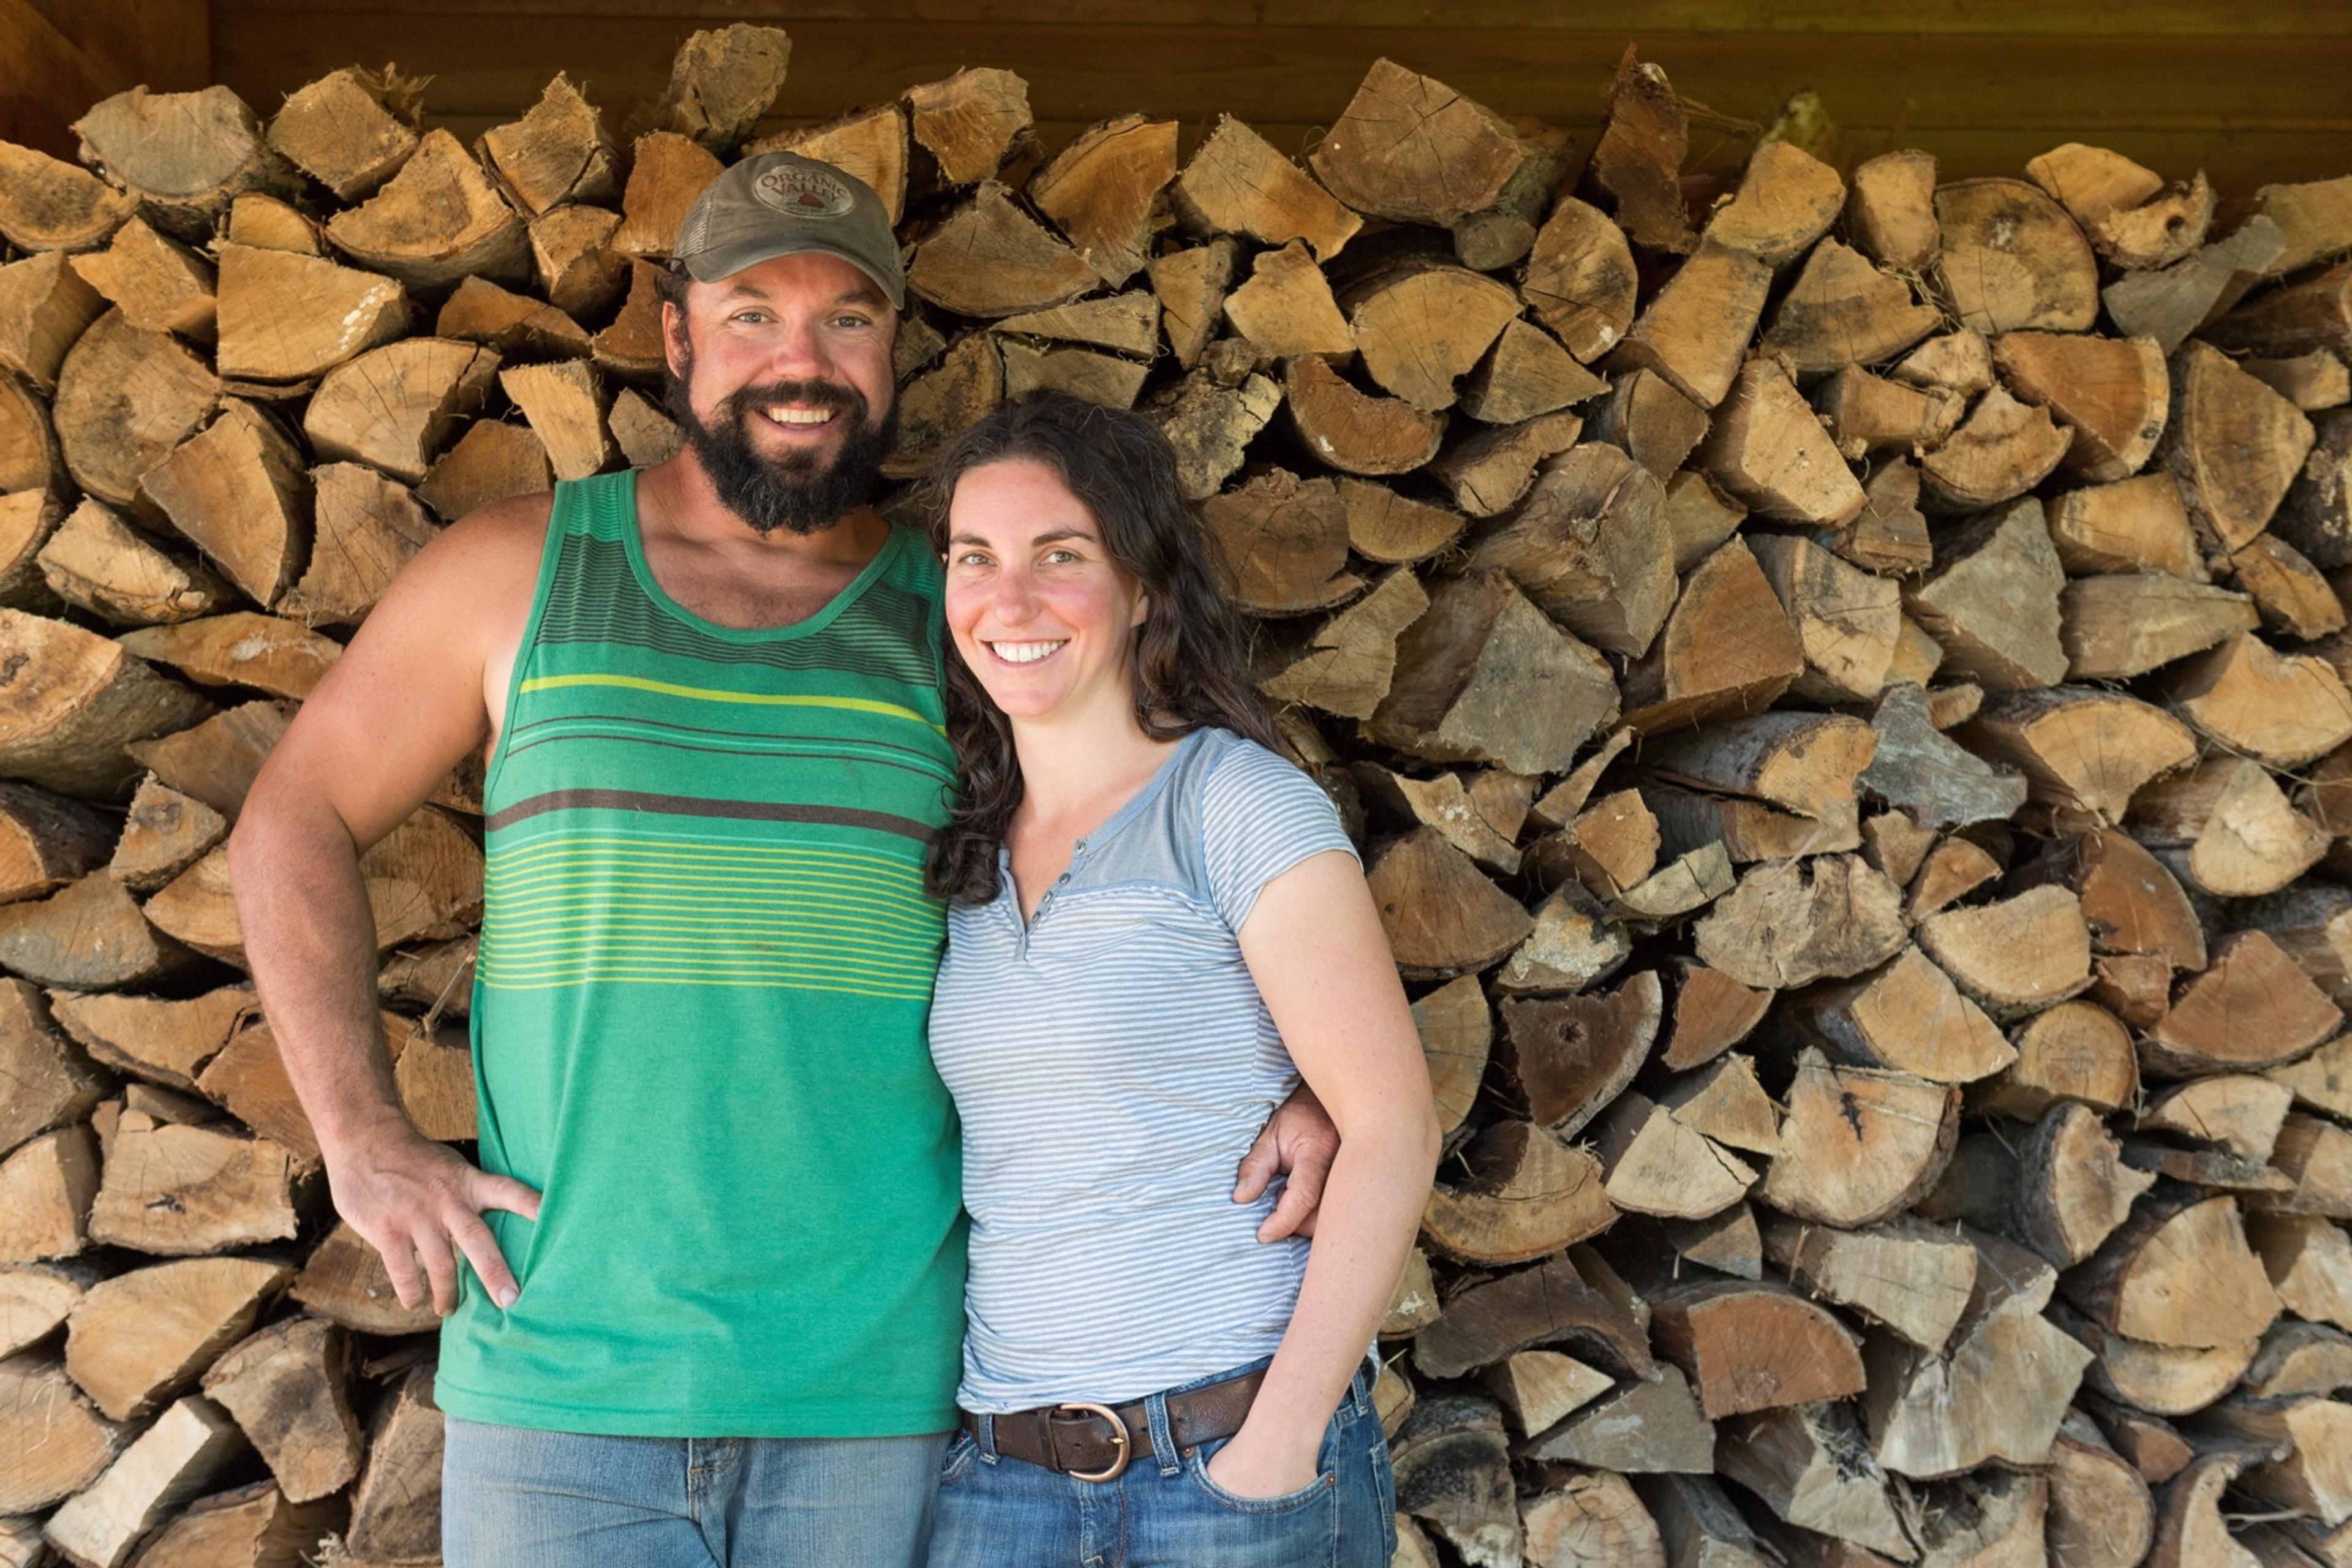 Tyler and Melanie smile at the camera while standing in front of a large stack of firewood.